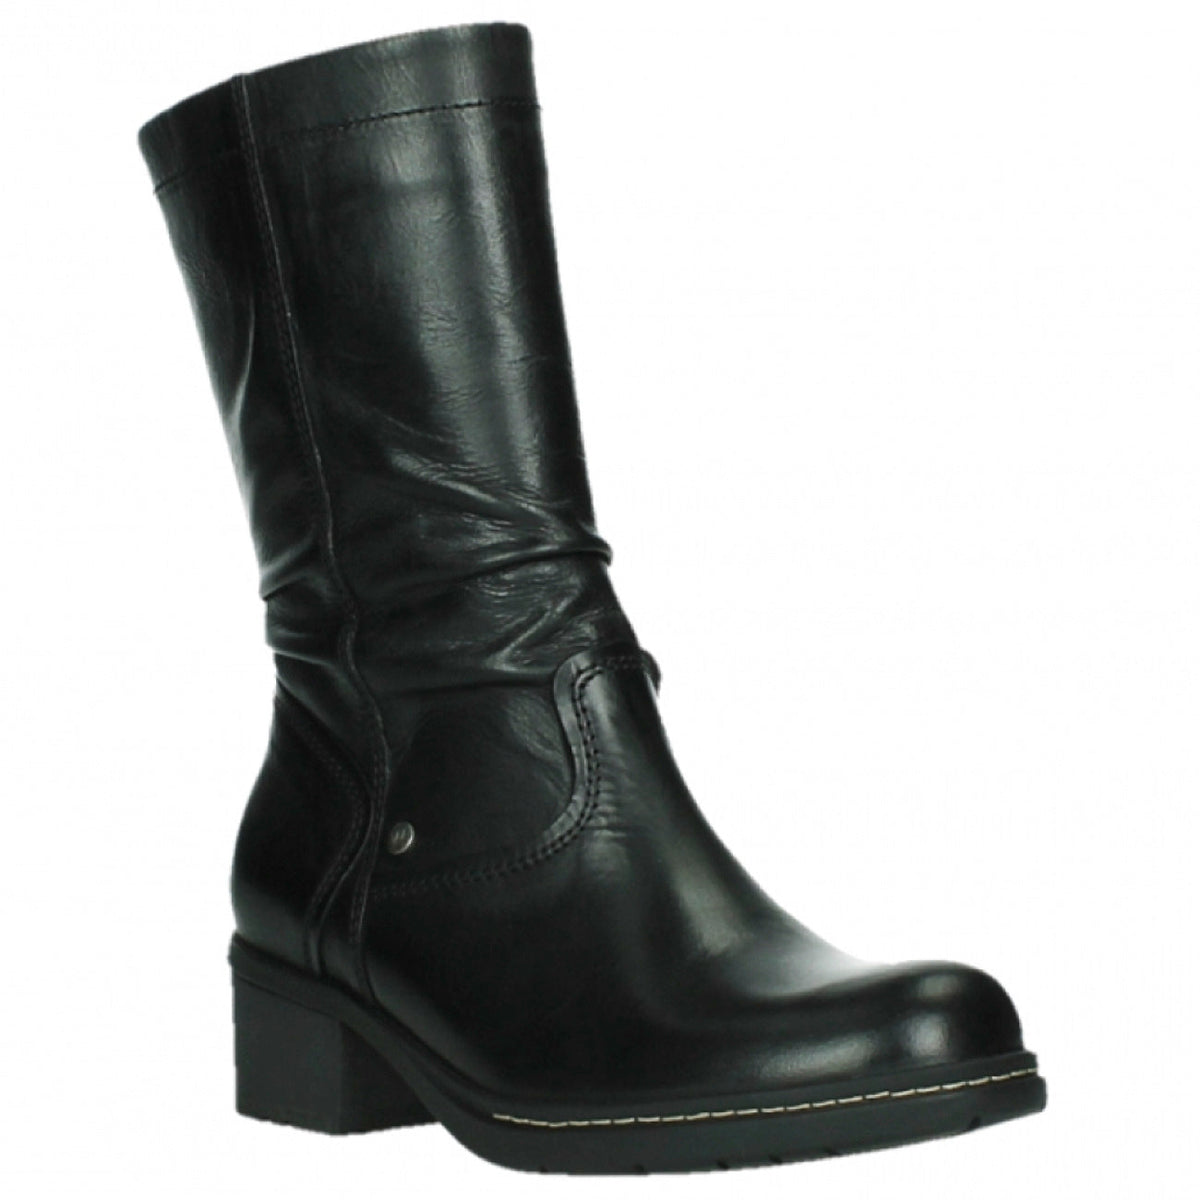 Wolky, Edmonton, Boots, Soft Wax Leather, Black Boots Wolky Black 38 